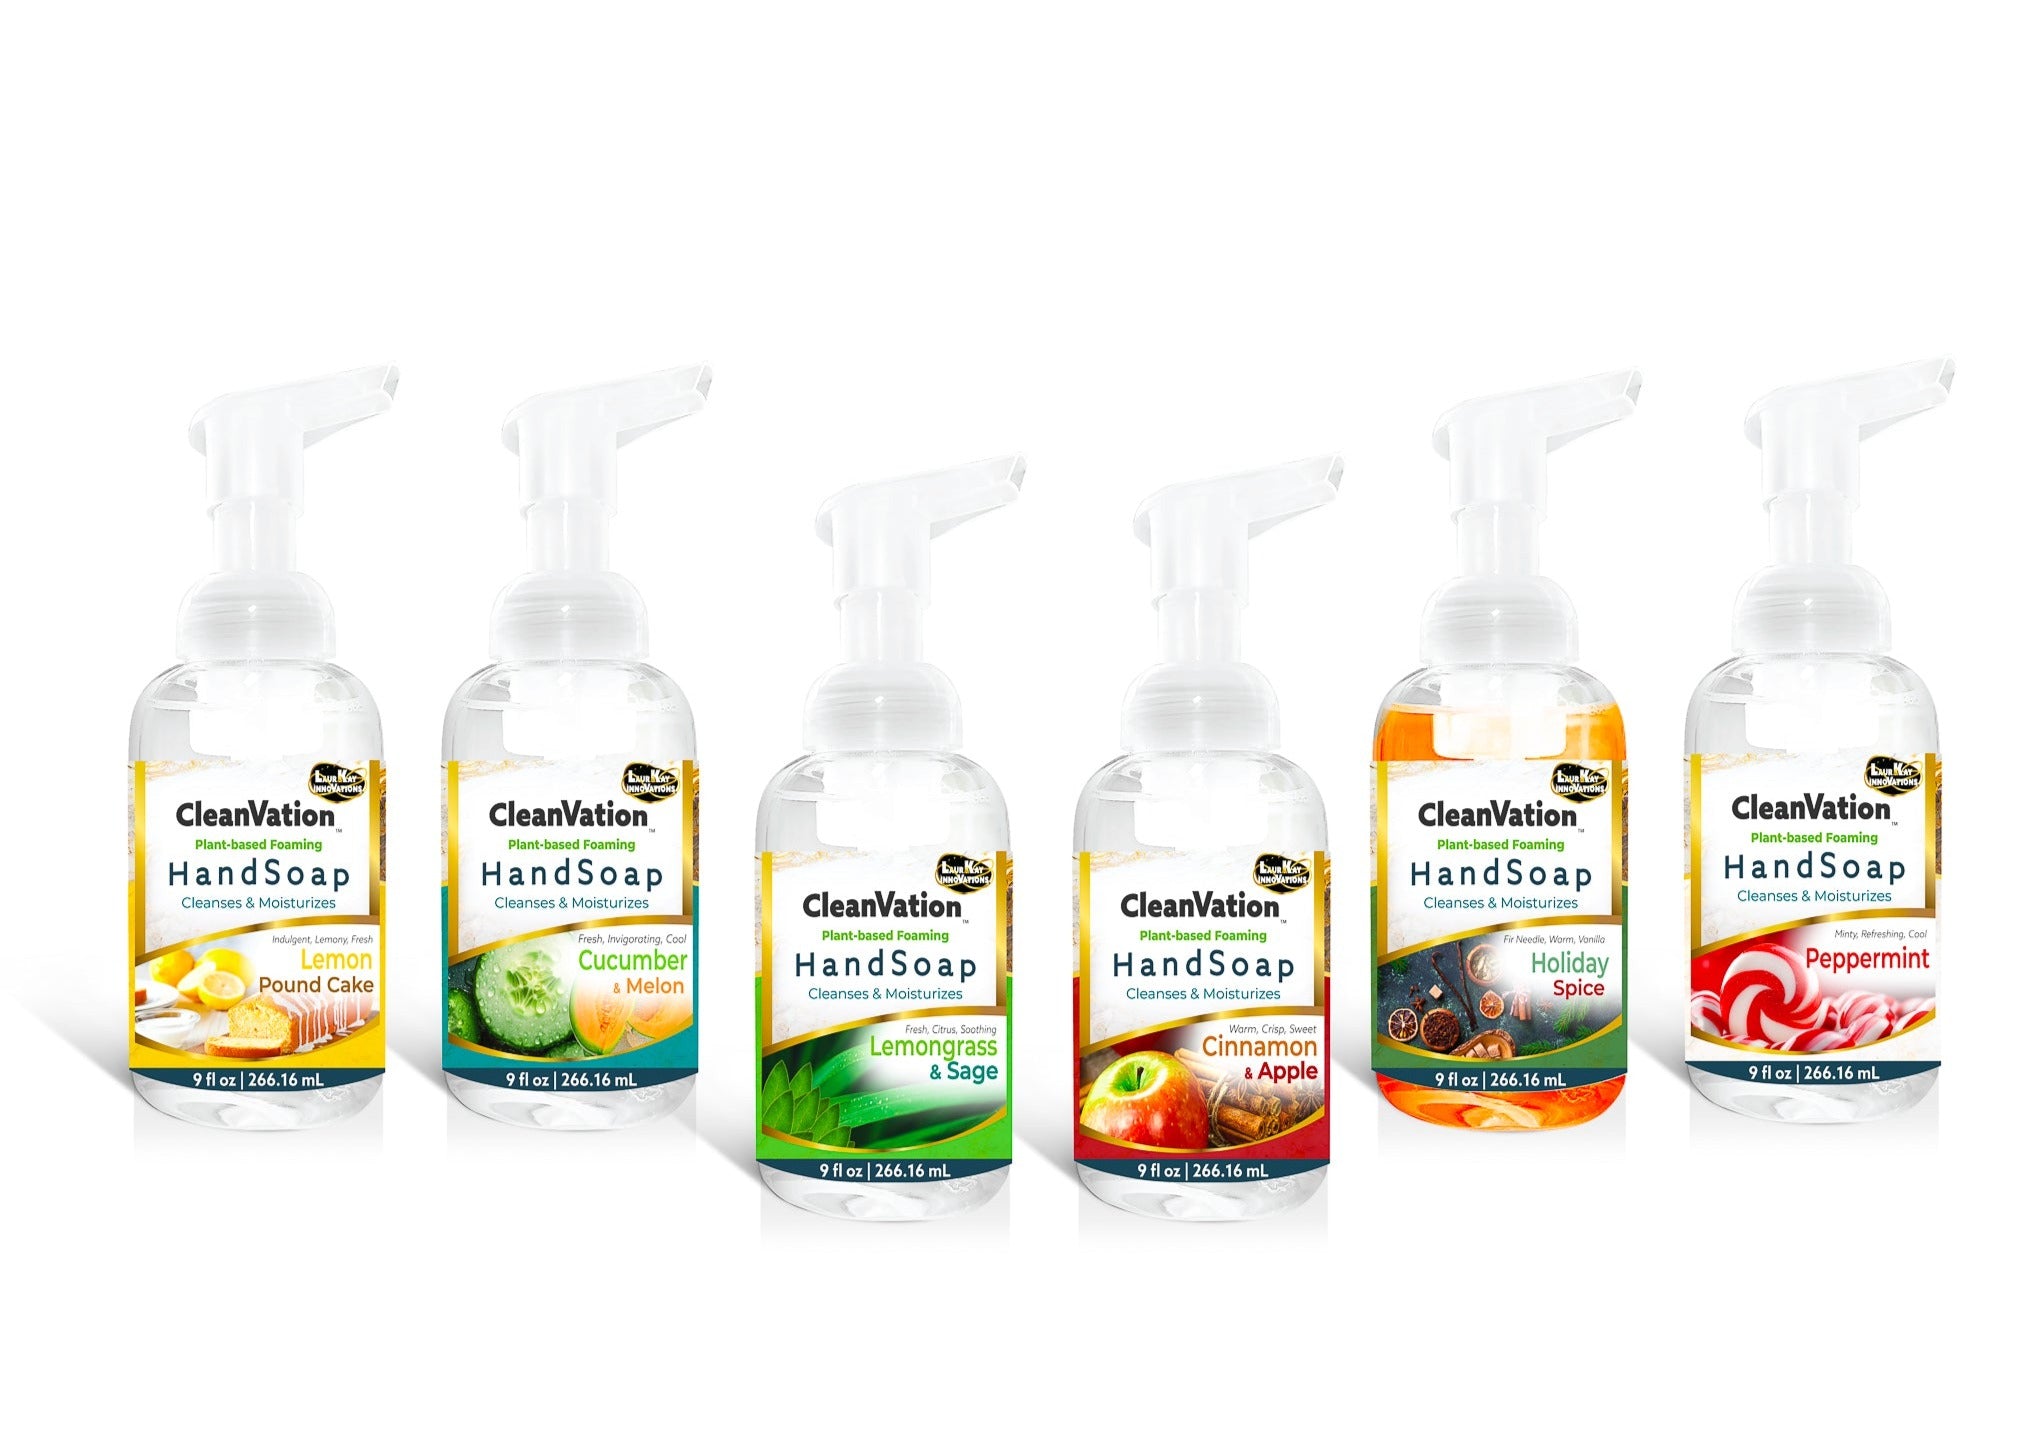 CleanVation HandSoap™ 6 Pack Variety: Plant-Based Foaming Hand Soap